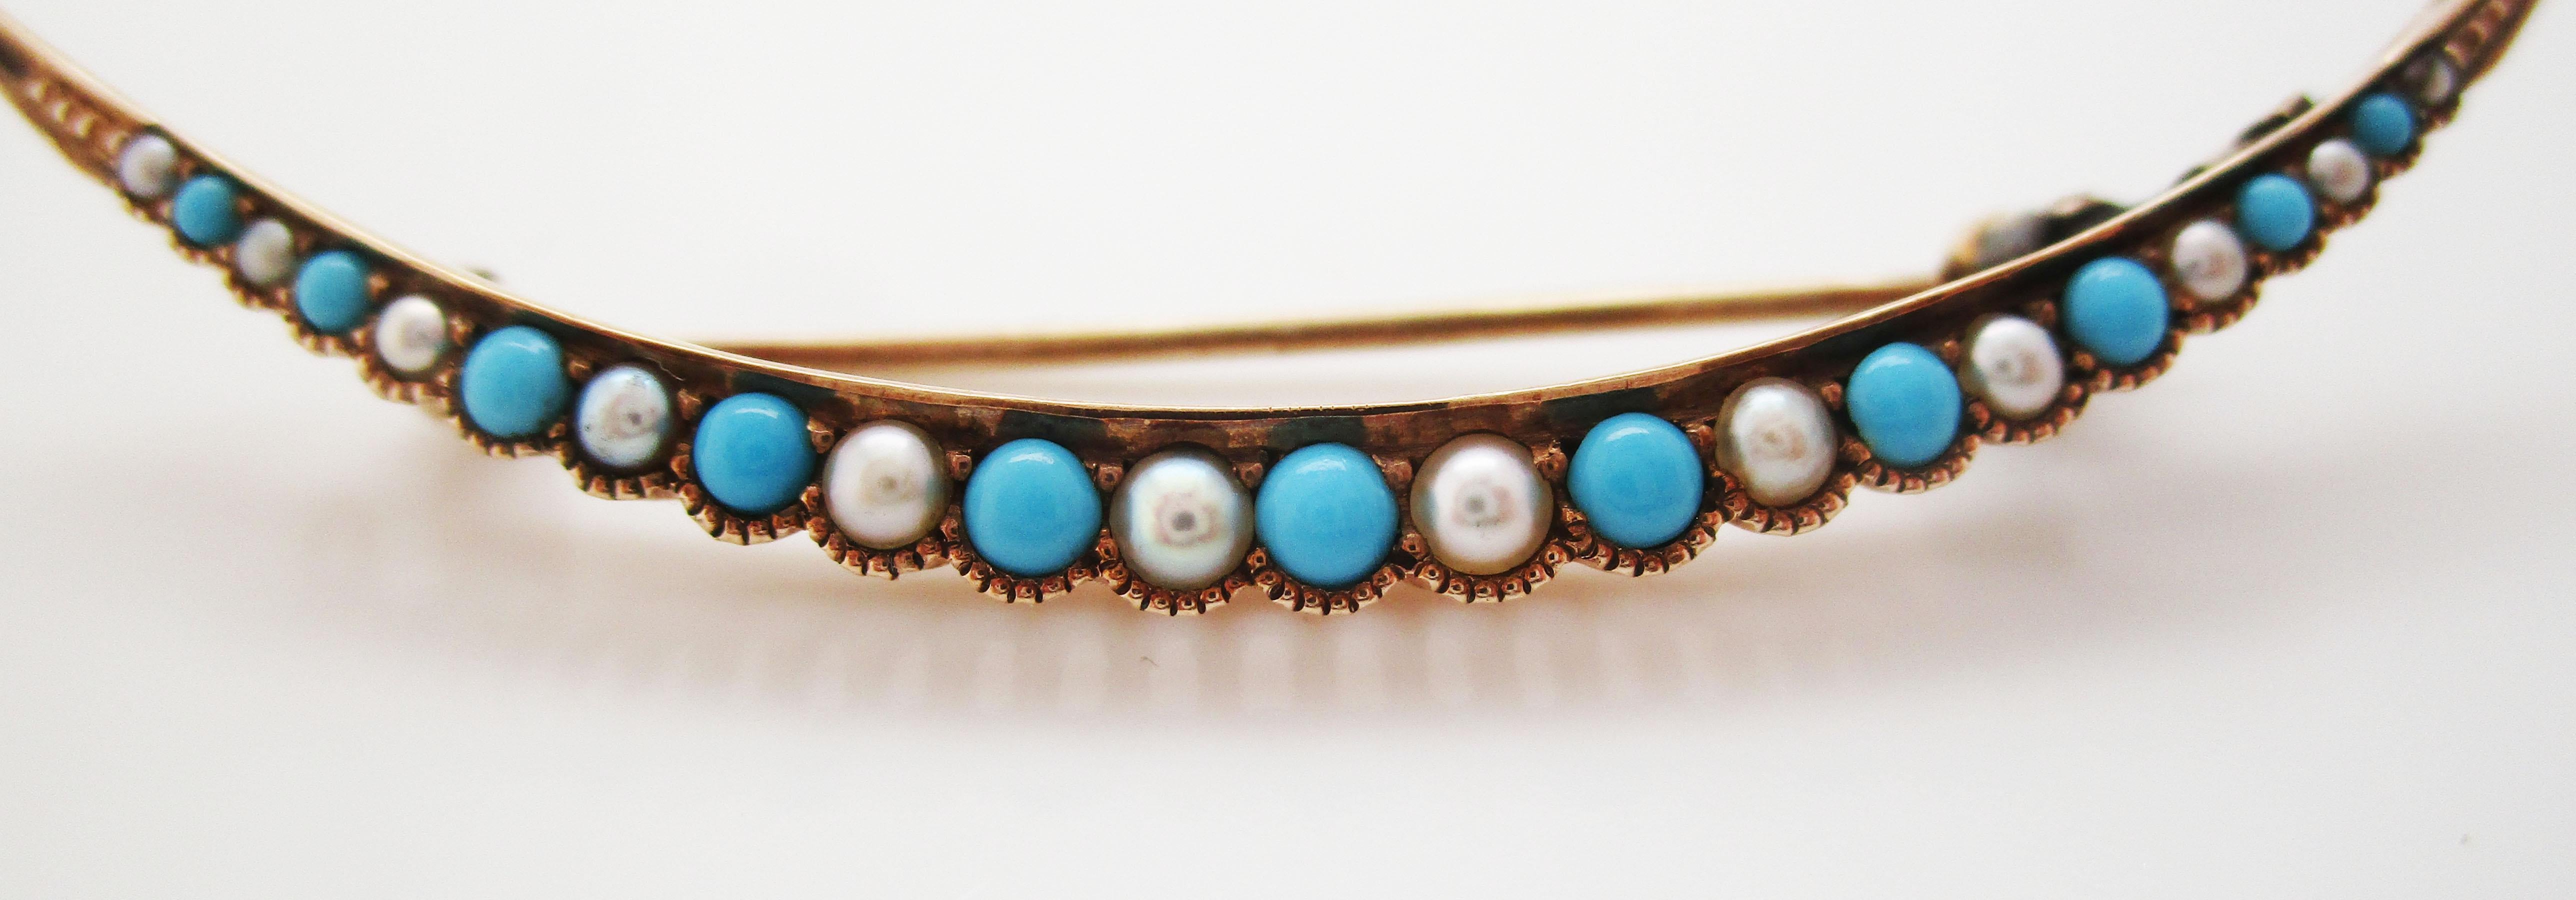 This is a beautiful Victorian pin from the 1880s in 14k yellow gold and featuring a gorgeous row of turquoise cabochons and stunning white seed pearls! The combination of pearls and Persian turquoise in yellow gold is a definitive Victorian look.